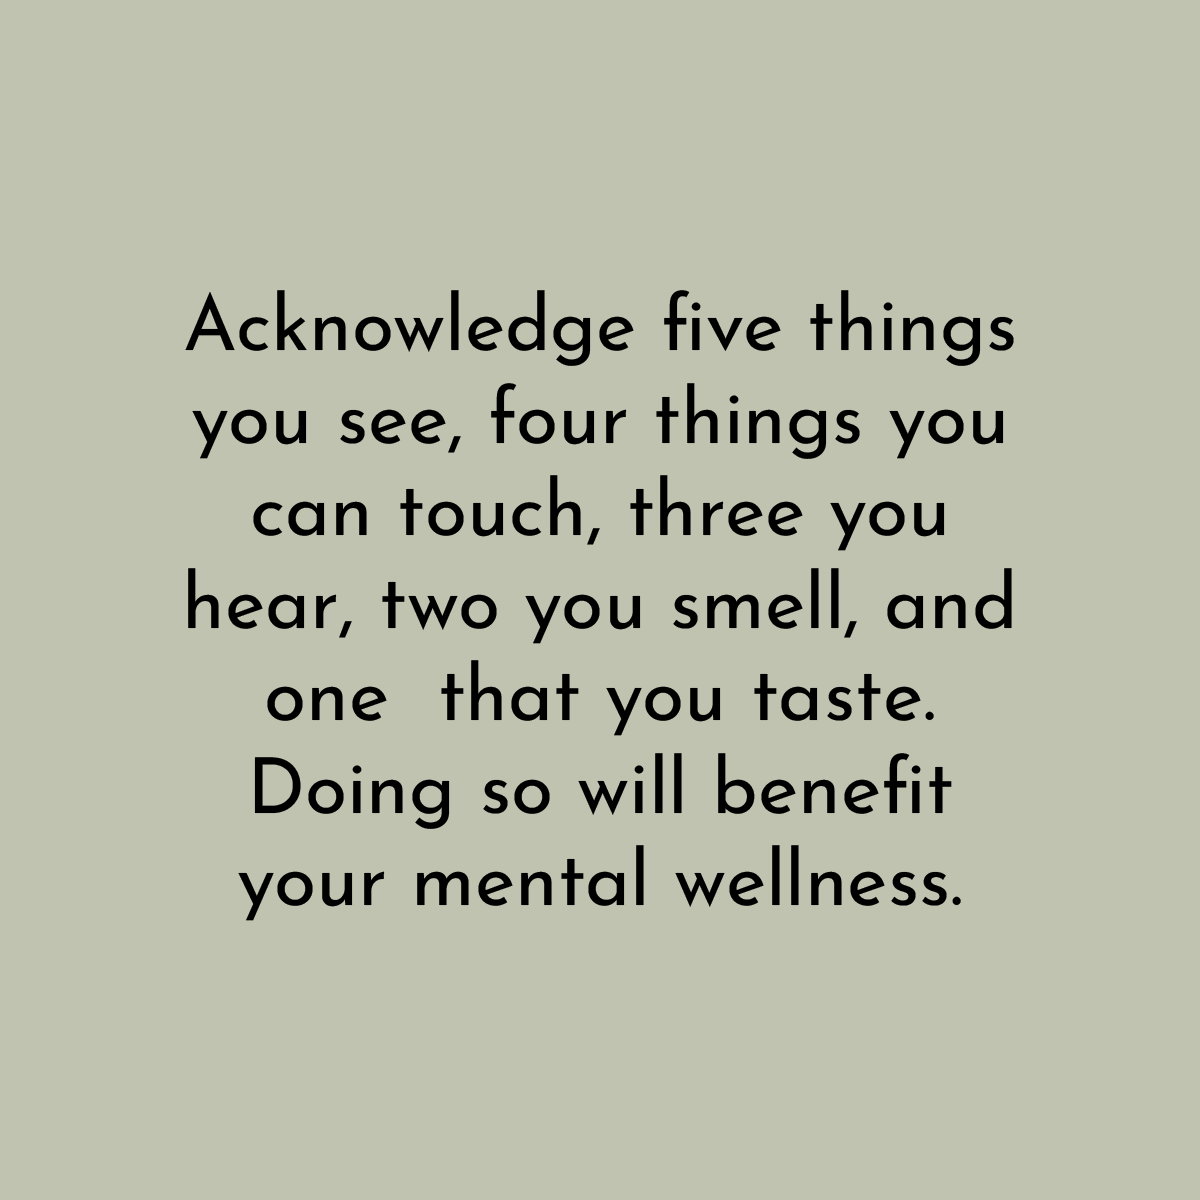 Acknowledge five things you see, four things you can touch, three you hear, two you smell, and one that you taste. Doing so will benefit your mental wellness.